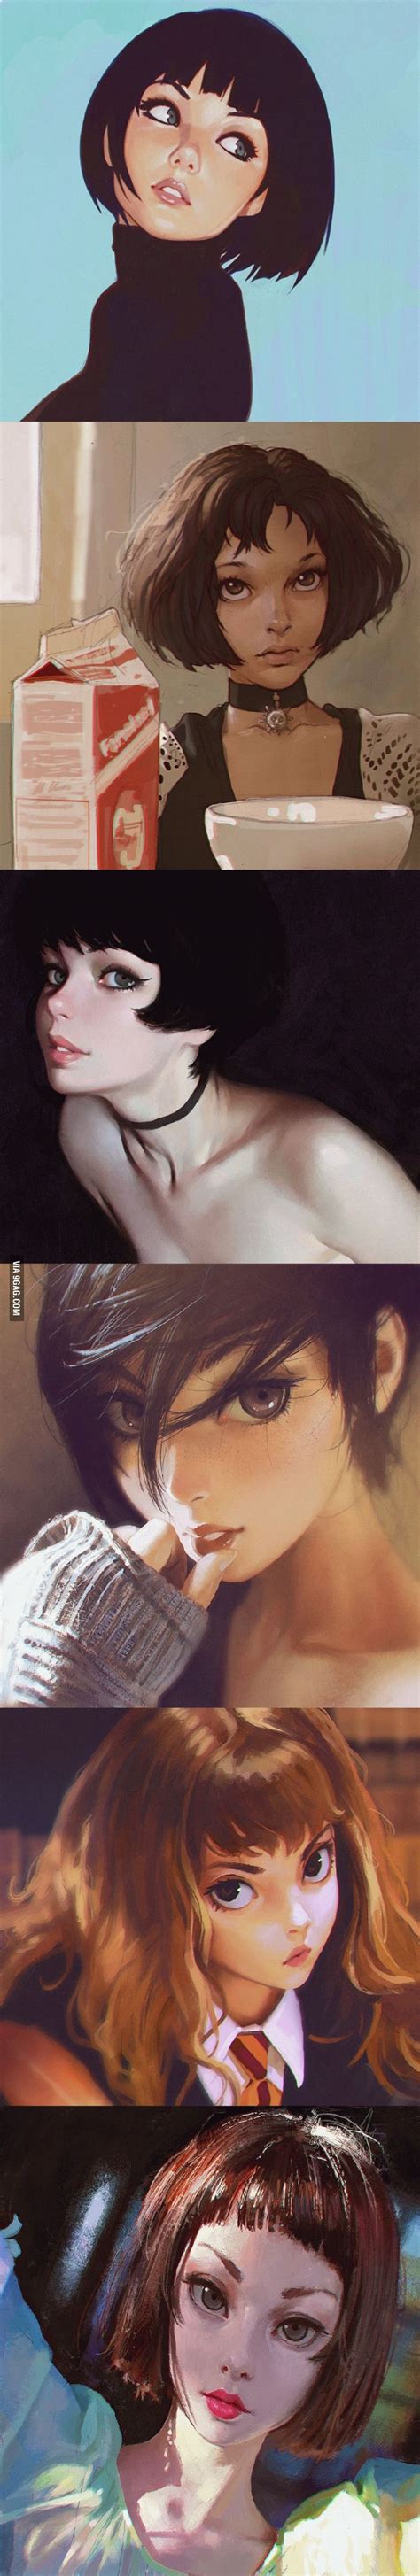 Ilya Kuvshinov S Work Just Can T Get Enough Of It 9GAG Character